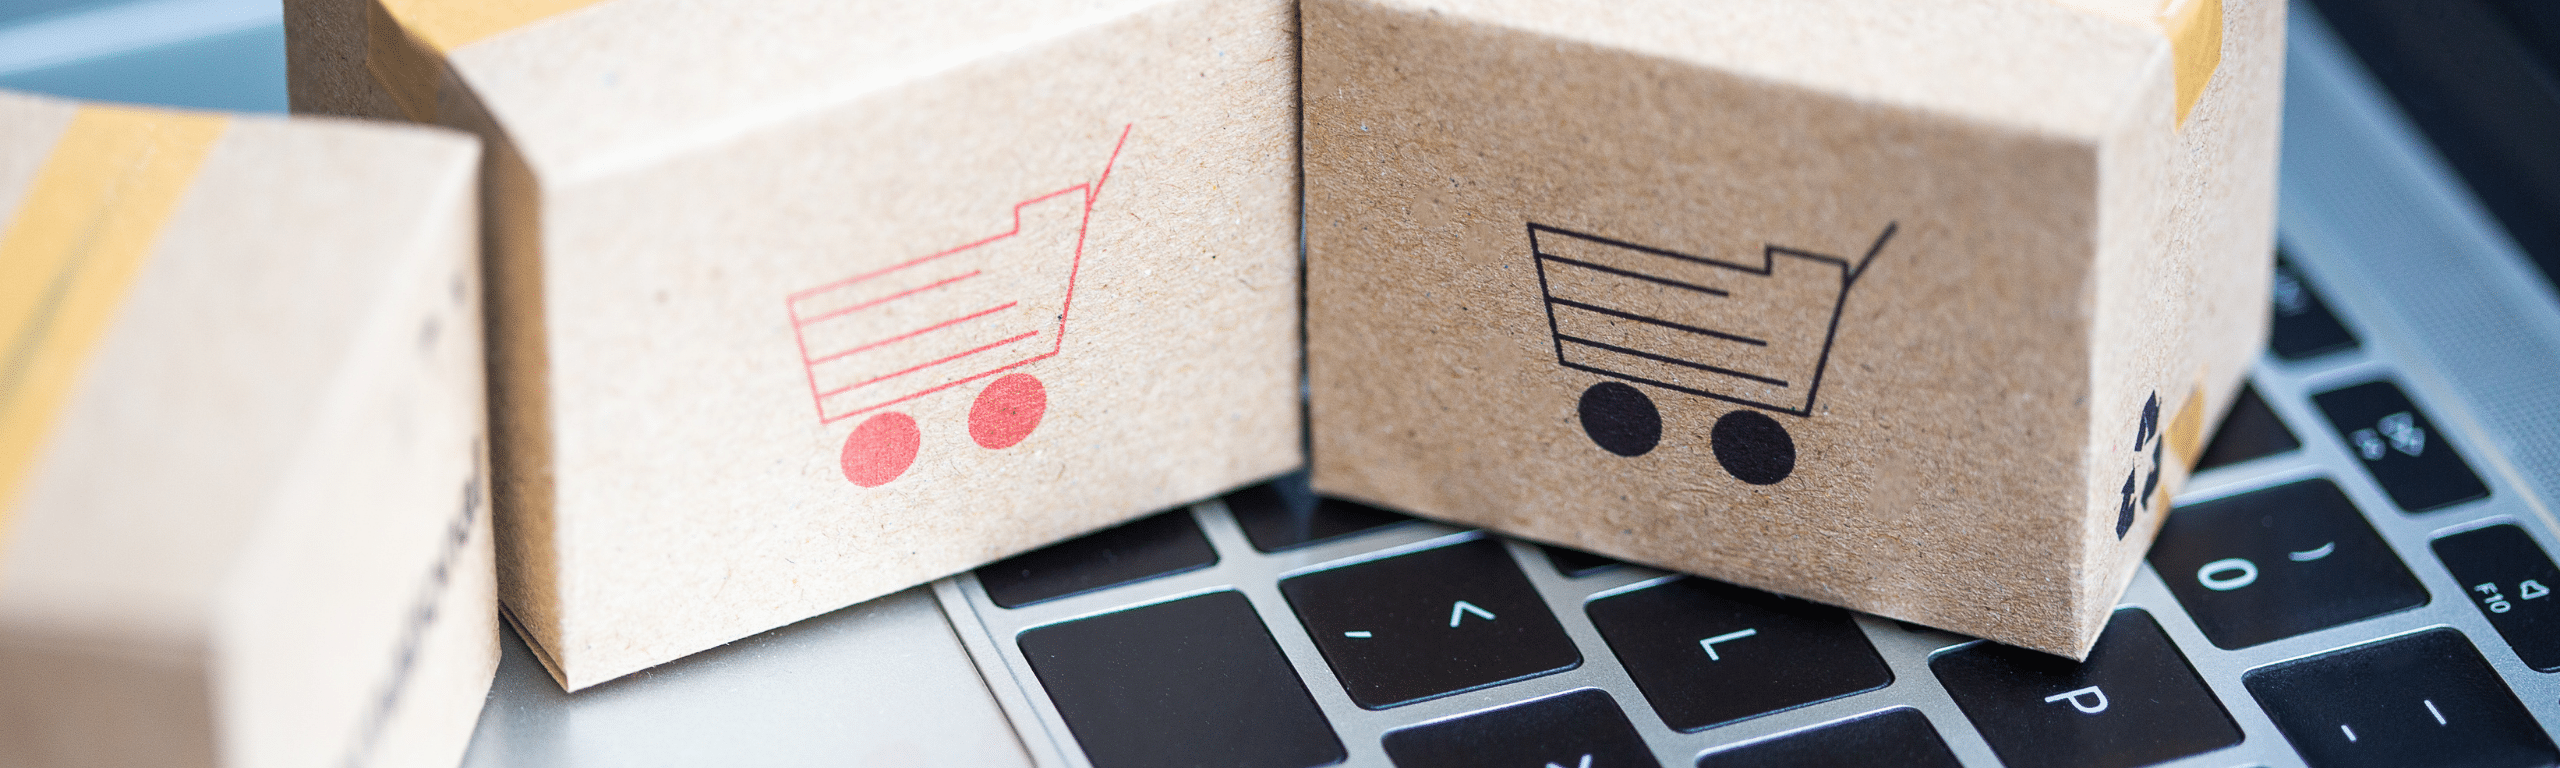 B2B Purchasing and Marketplaces – 7 tips from 3 experts: Manutan, Zetrace and Webhelp Payment Services